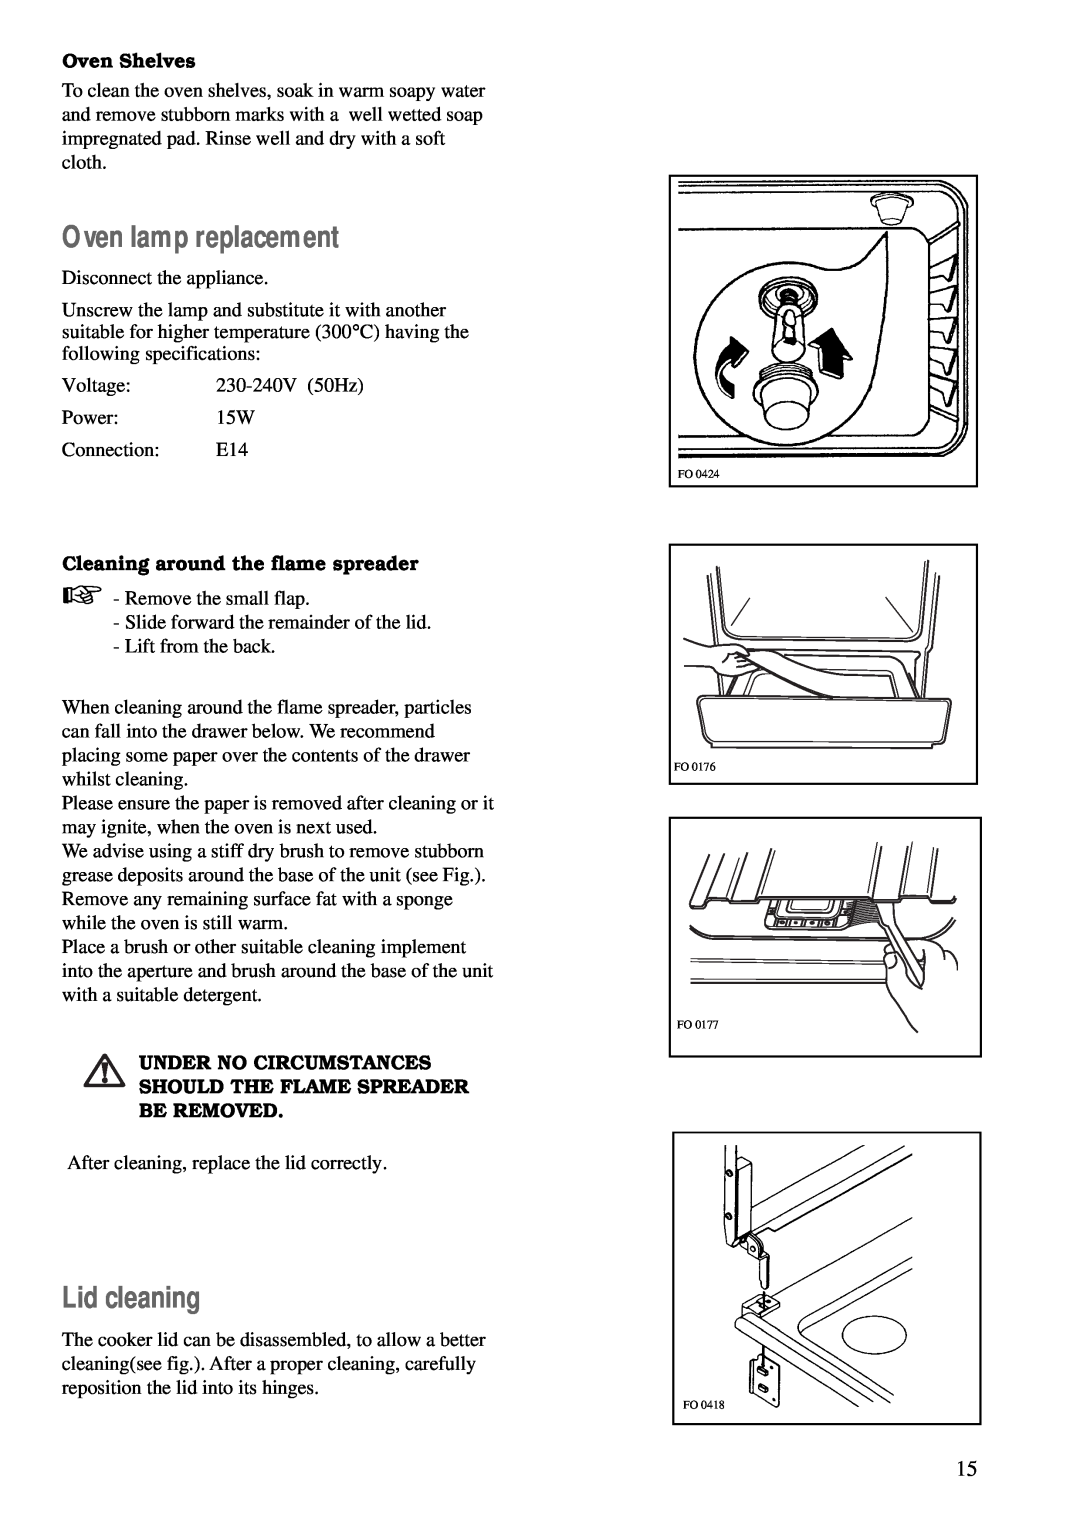 Electrolux CSIG 503 W manual Oven lamp replacement, Lid cleaning, Oven Shelves, Cleaning around the flame spreader 